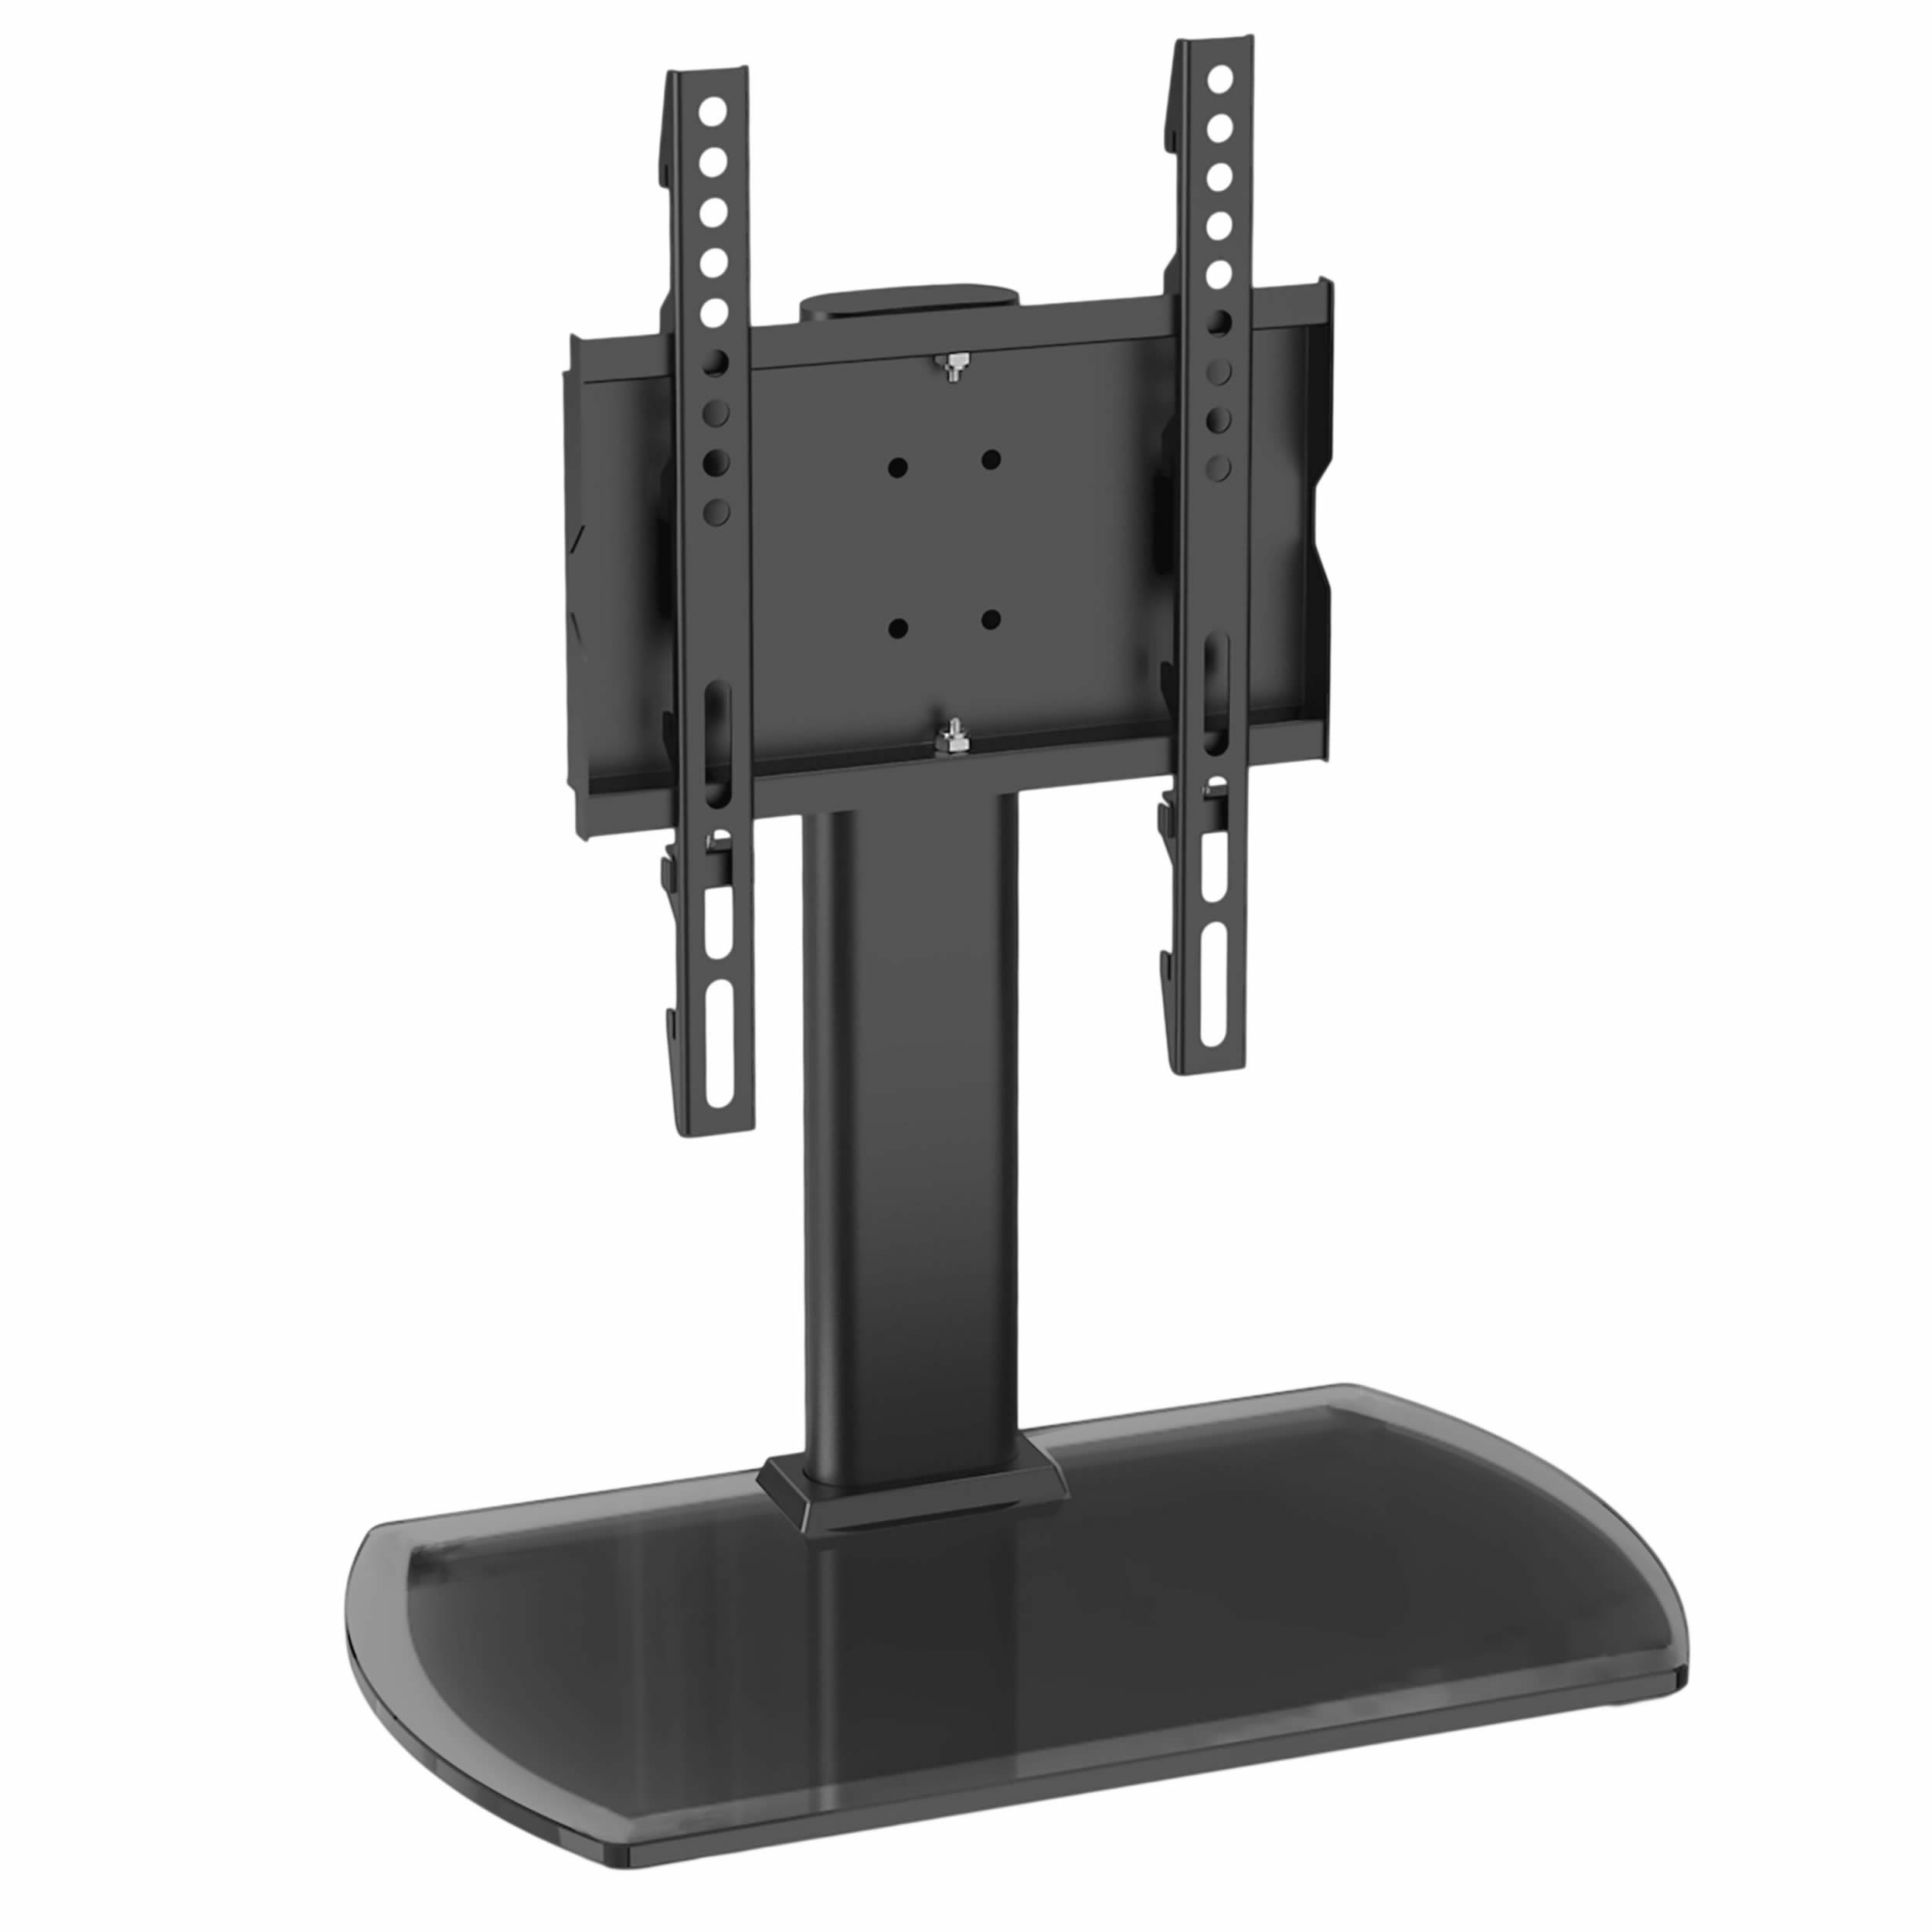 TTAP Swivel Pedestal Tabletop TV Stand up to 43inch